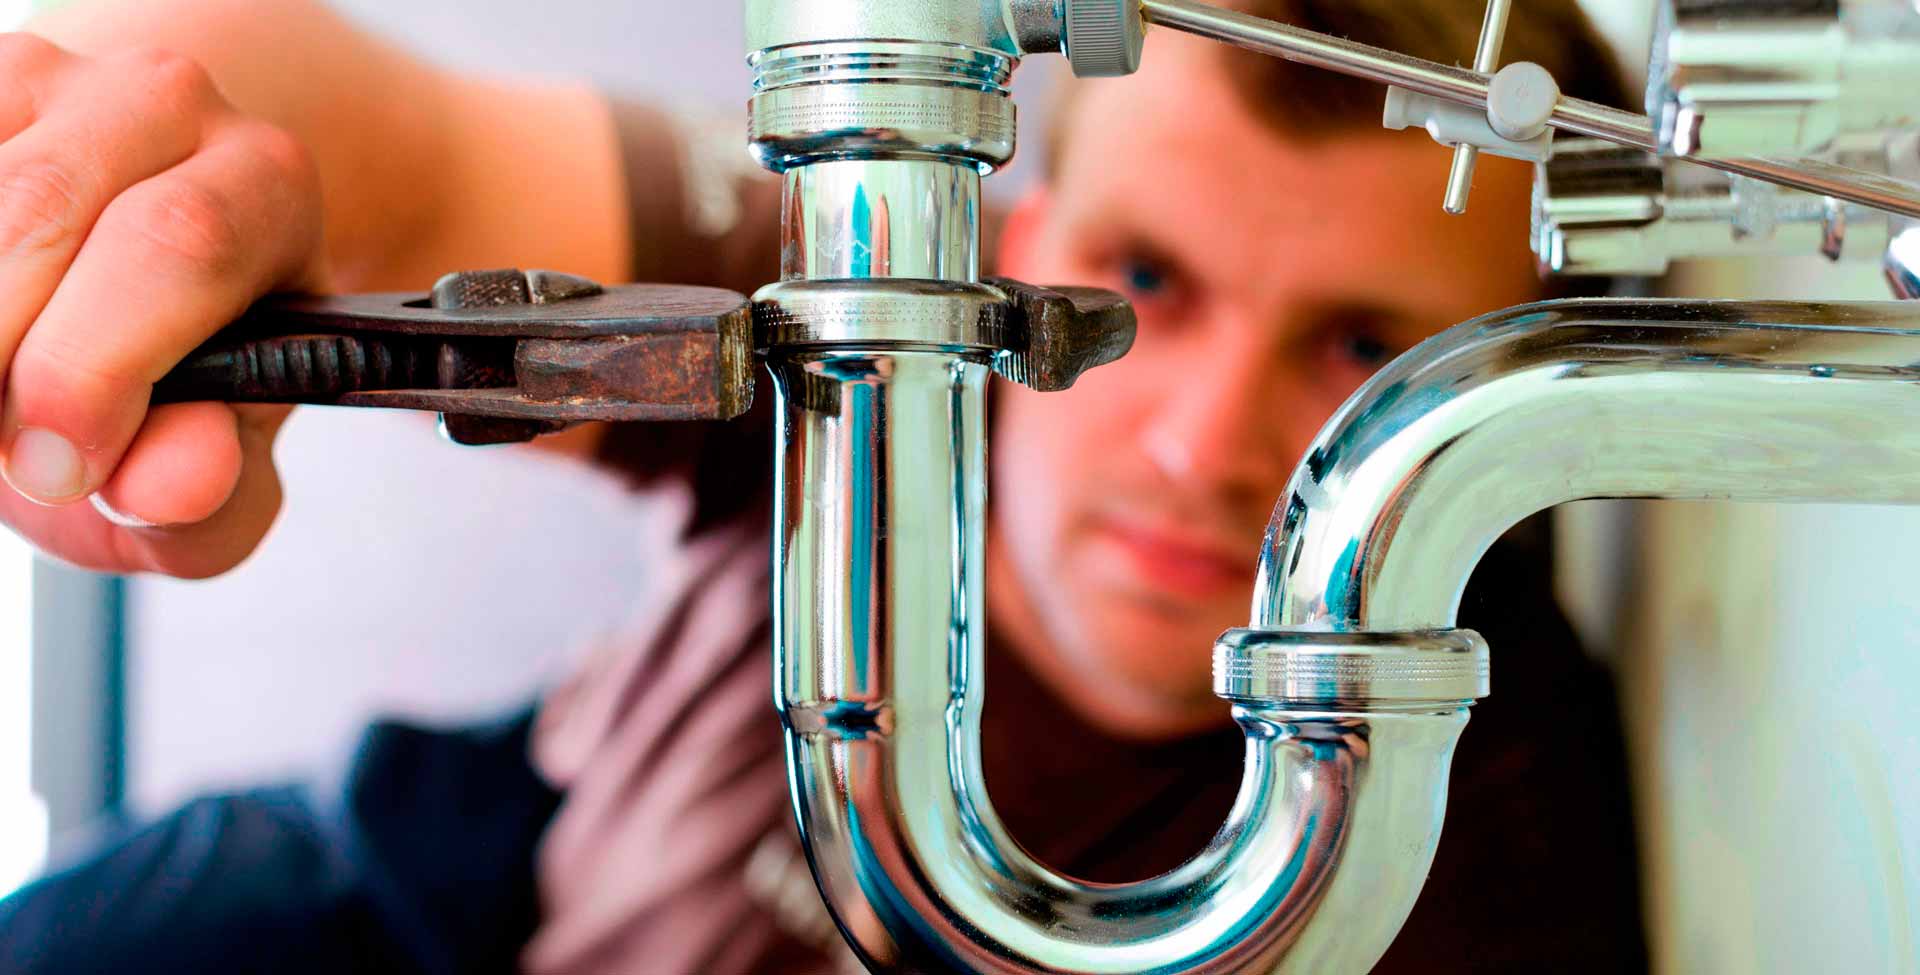 St. Clair Shores Plumbing Company